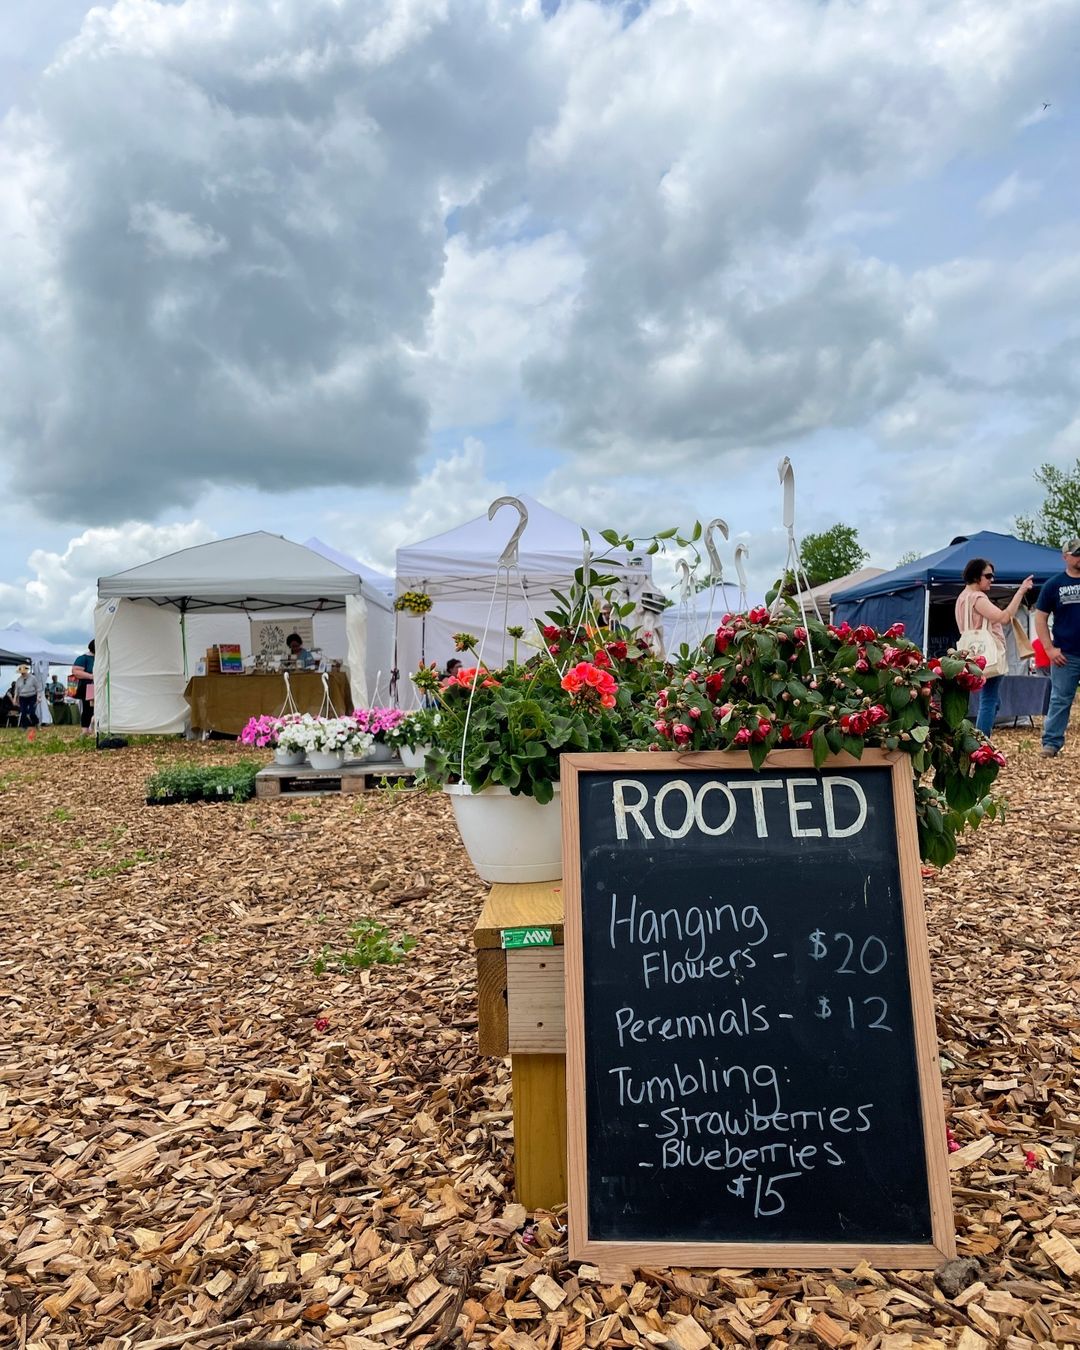 On Saturday, May 14, @rootedfarmstead celebrated their grand opening with us! ✨
Now you can enjoy their pick-your-own flower events at their new location, 138 Scotts Ave., in Bellefonte, Pa. 